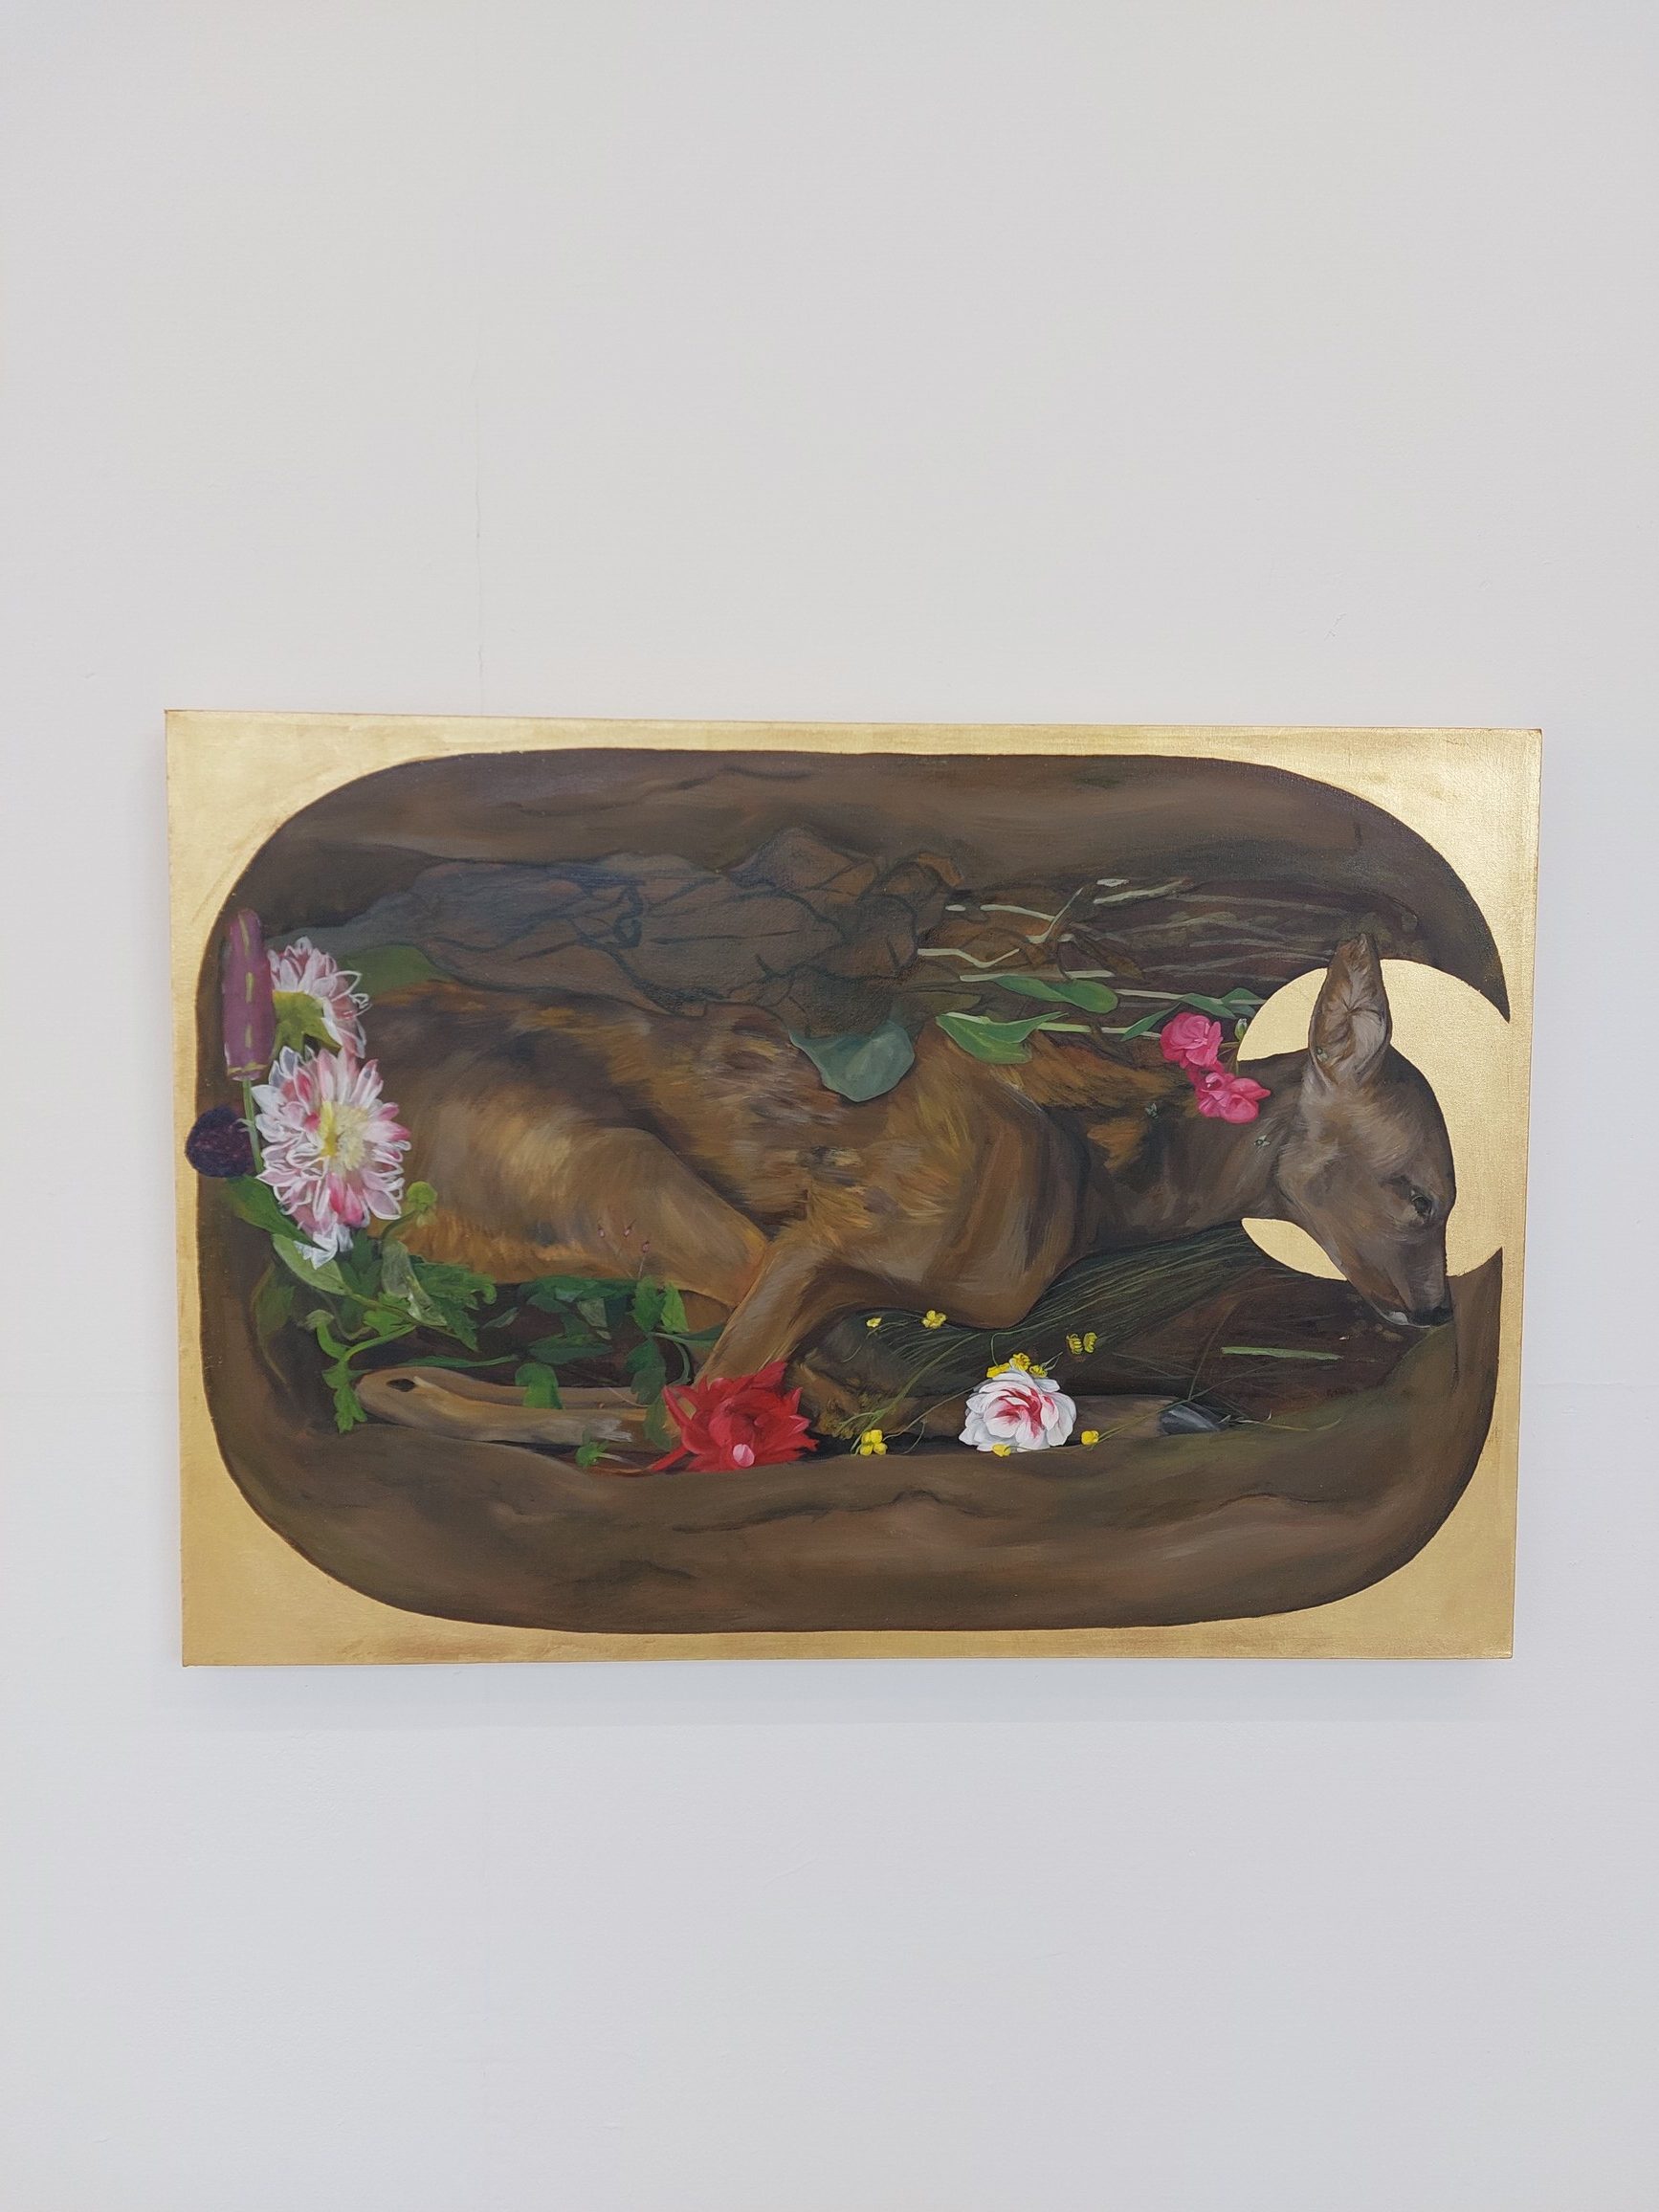 Oil painting of a deer curled into a resting pose in a grave from above surrounded by flowers and plants, encircled by gold with a gold halo around its head.